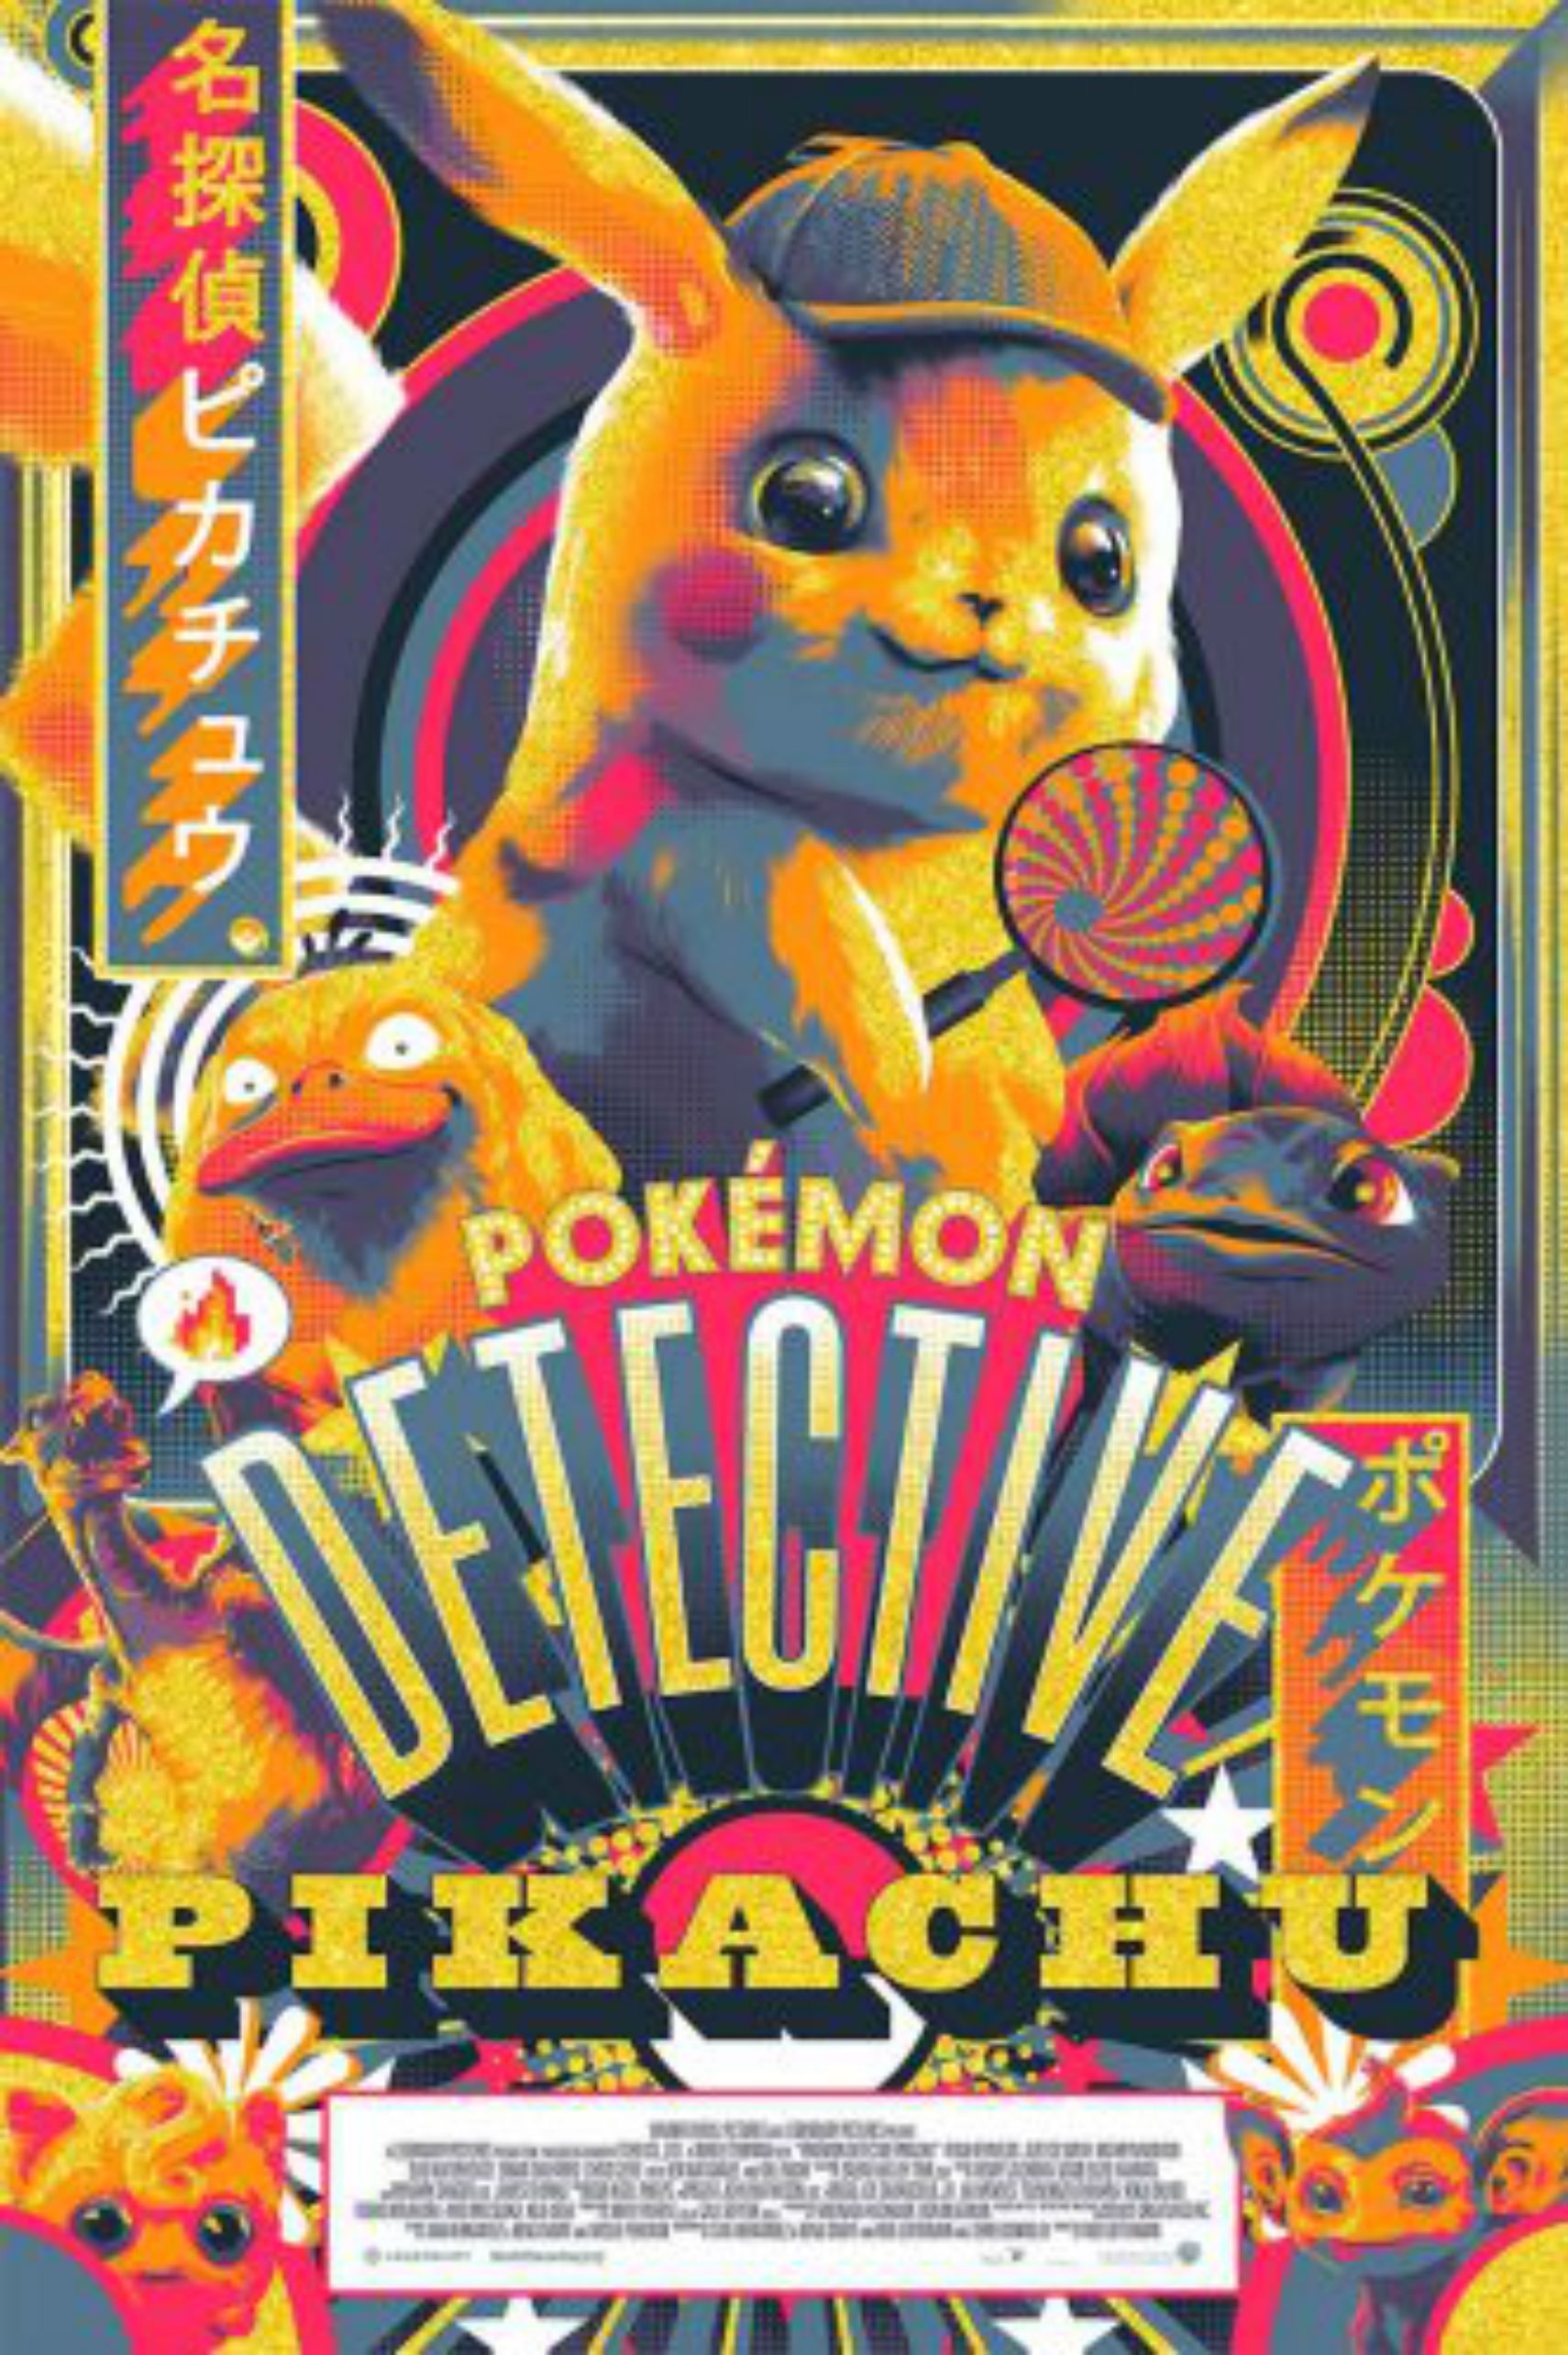 Impressive Prints Of Detective Pikachu It And Others To Appear At SDCC 2019